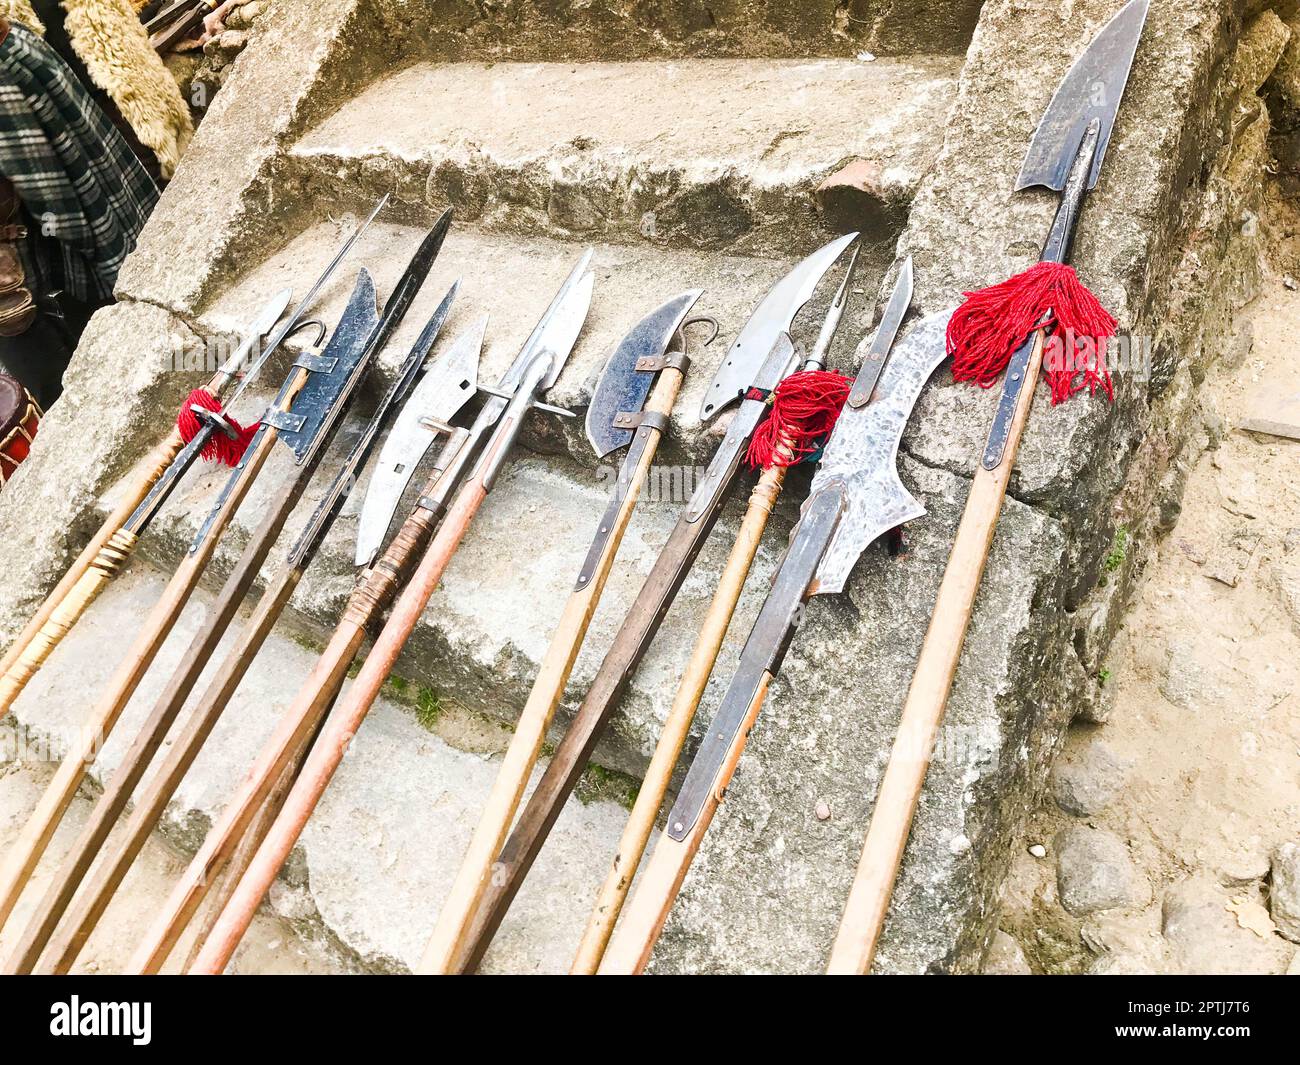 The old ancient medieval cold weapons, axes, halberds, knives, swords with wooden handles lick on the stone steps of the castle. Stock Photo